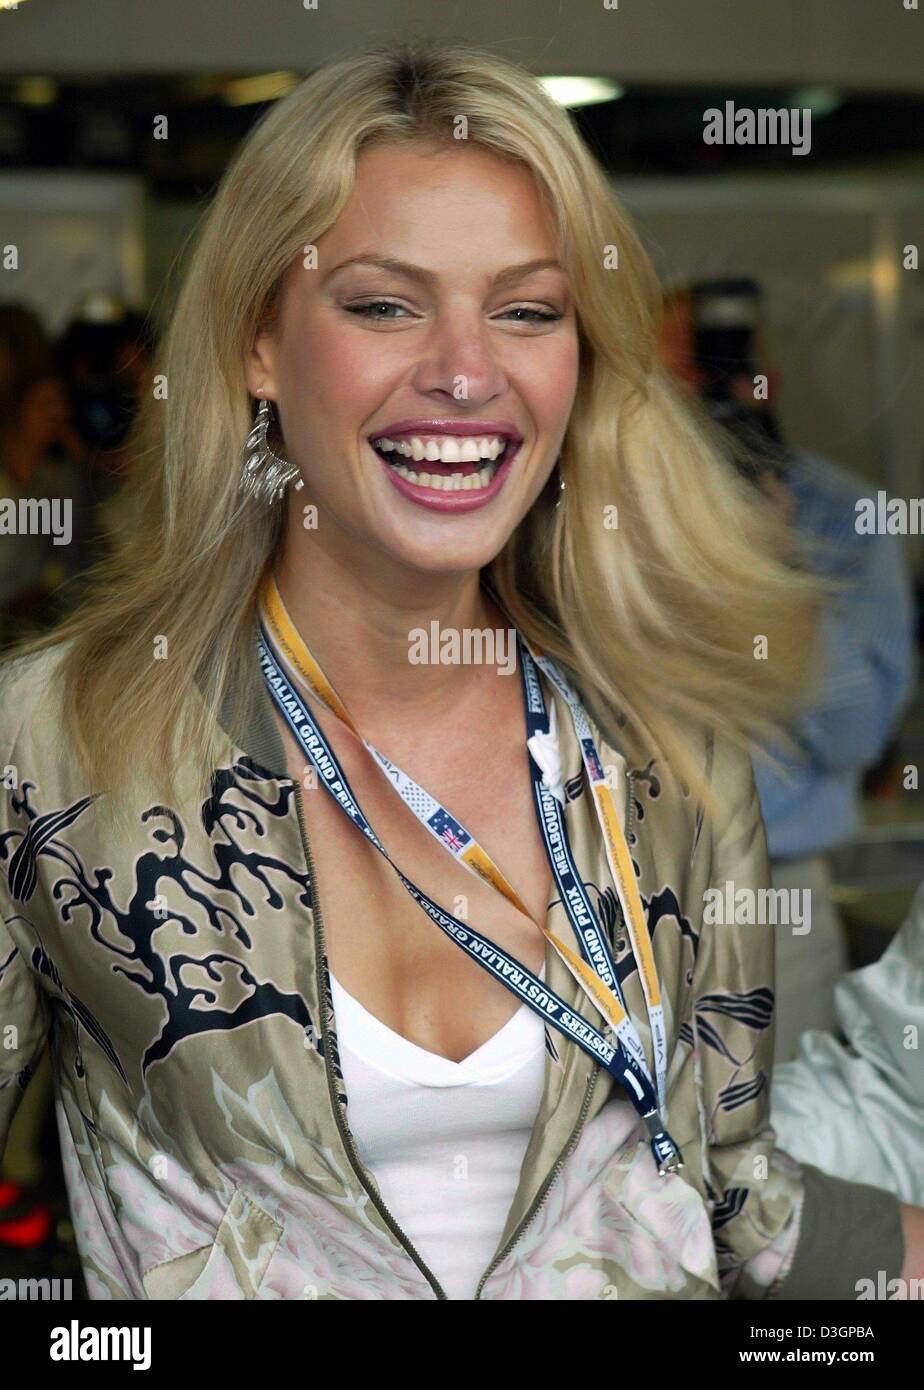 (dpa) The Australian model Kristy Hinze beams into the camera at the 'Albert Park' racetrack on Sunday, 7 March, 2004 in Melbourne. Stock Photo